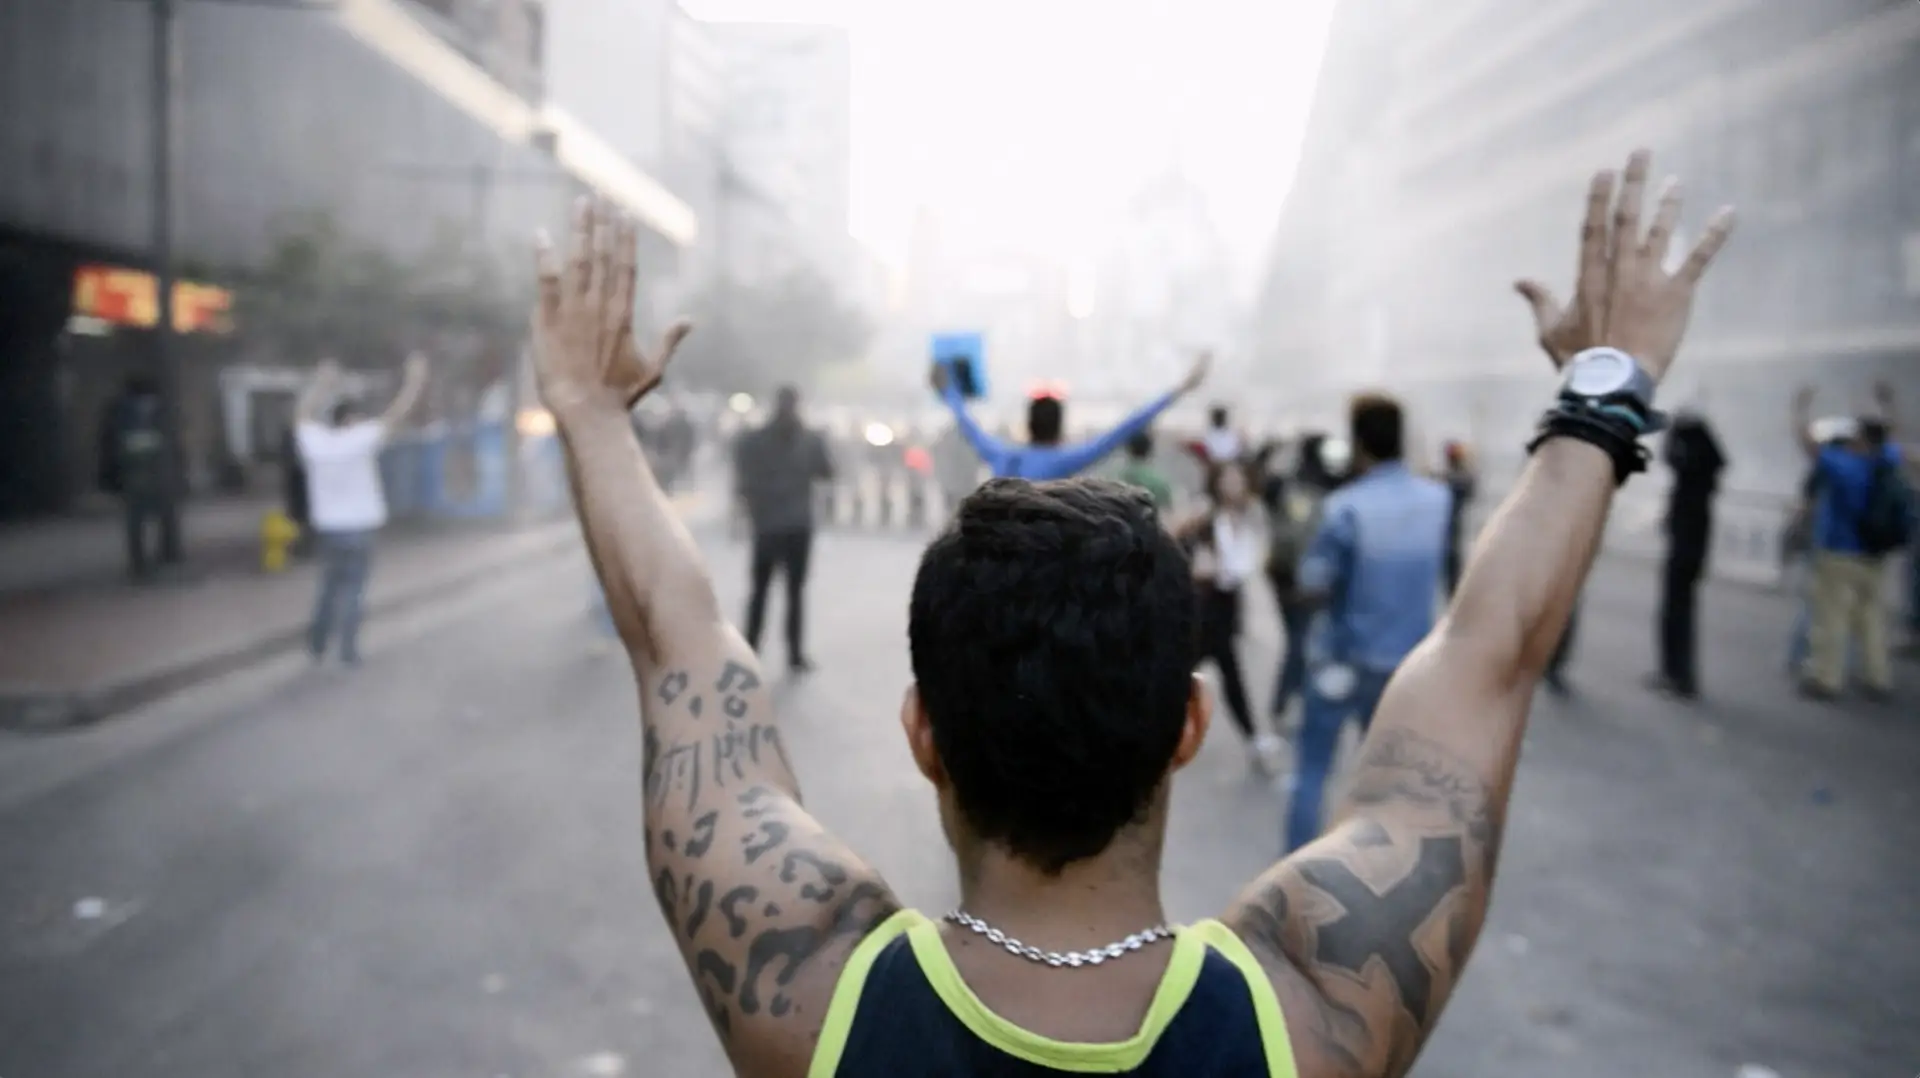 A man raises his arms in the middle of a street featuring entertainment.